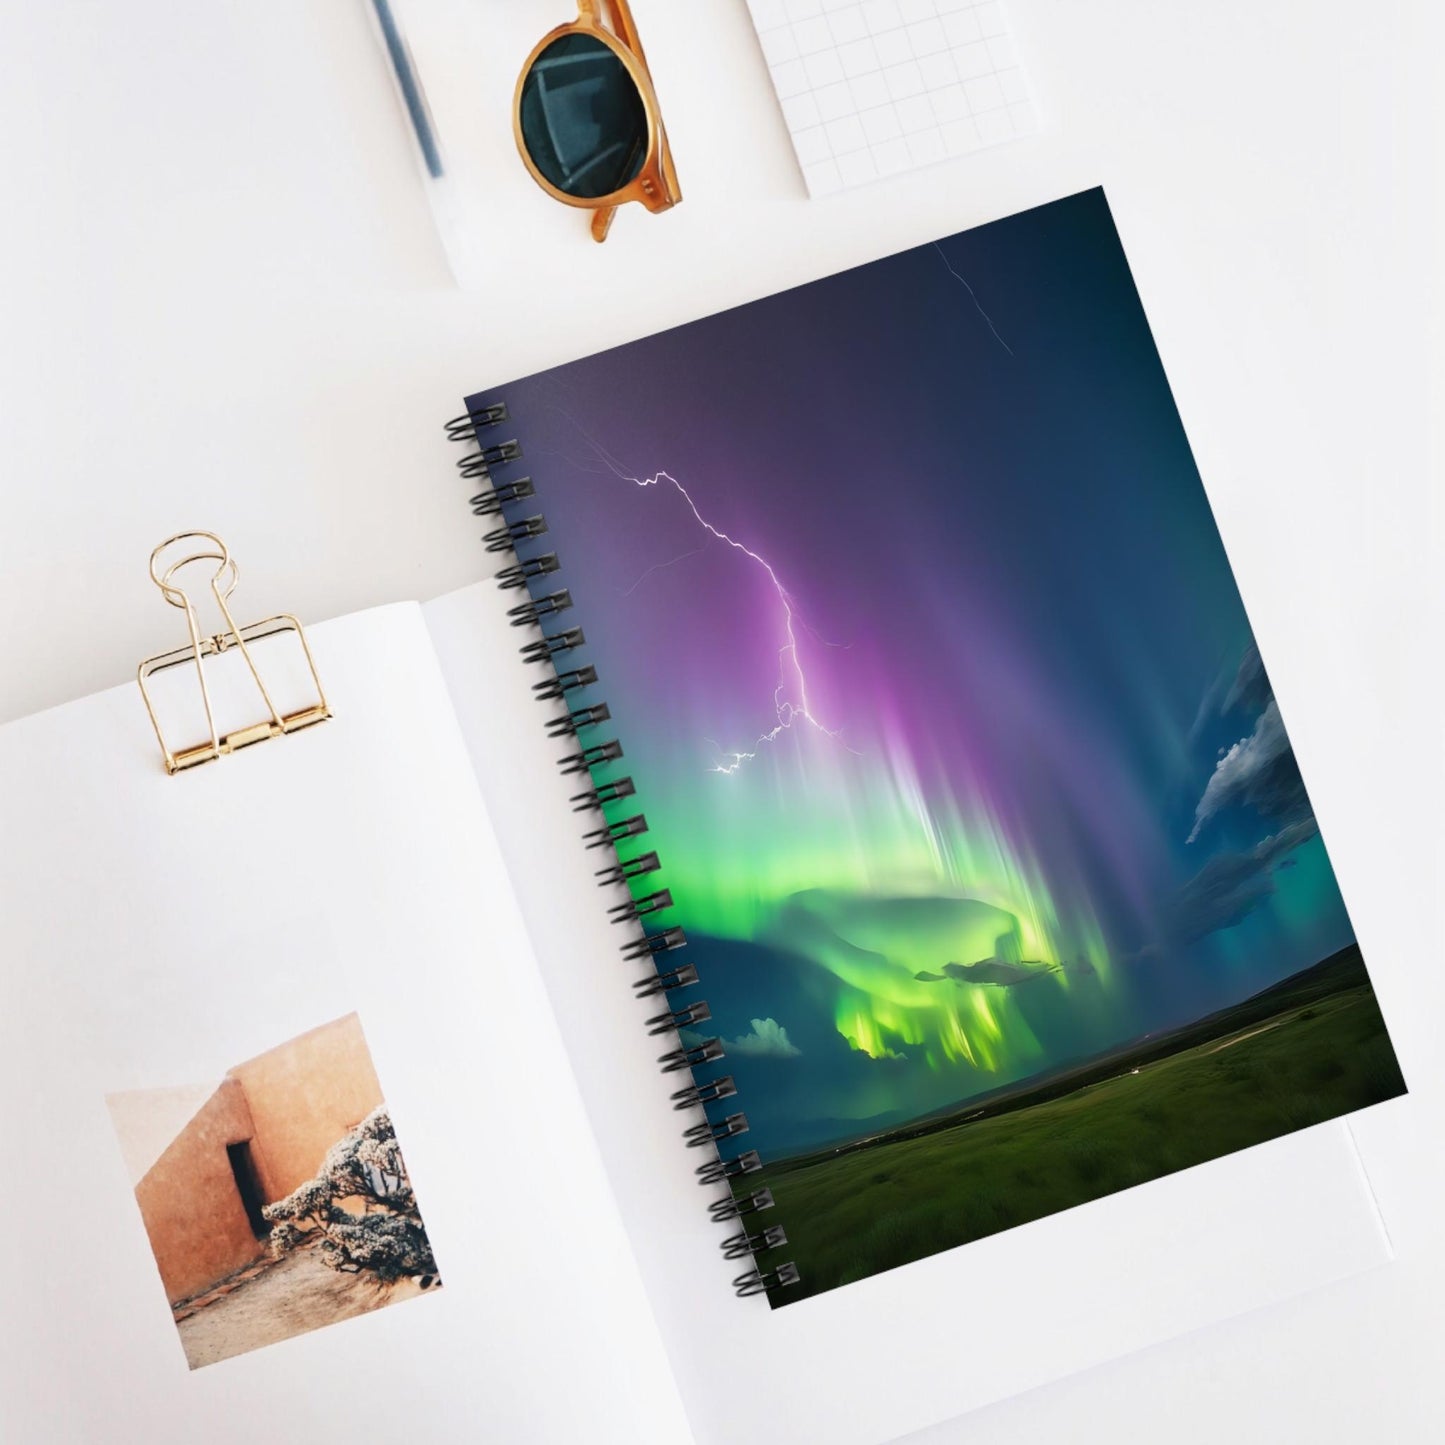 Unique Aurora Borealis Spiral Notebook Ruled Line - Personalized Northern Light View - Stationary Accessories - Perfect Aurora Lovers Gift 25